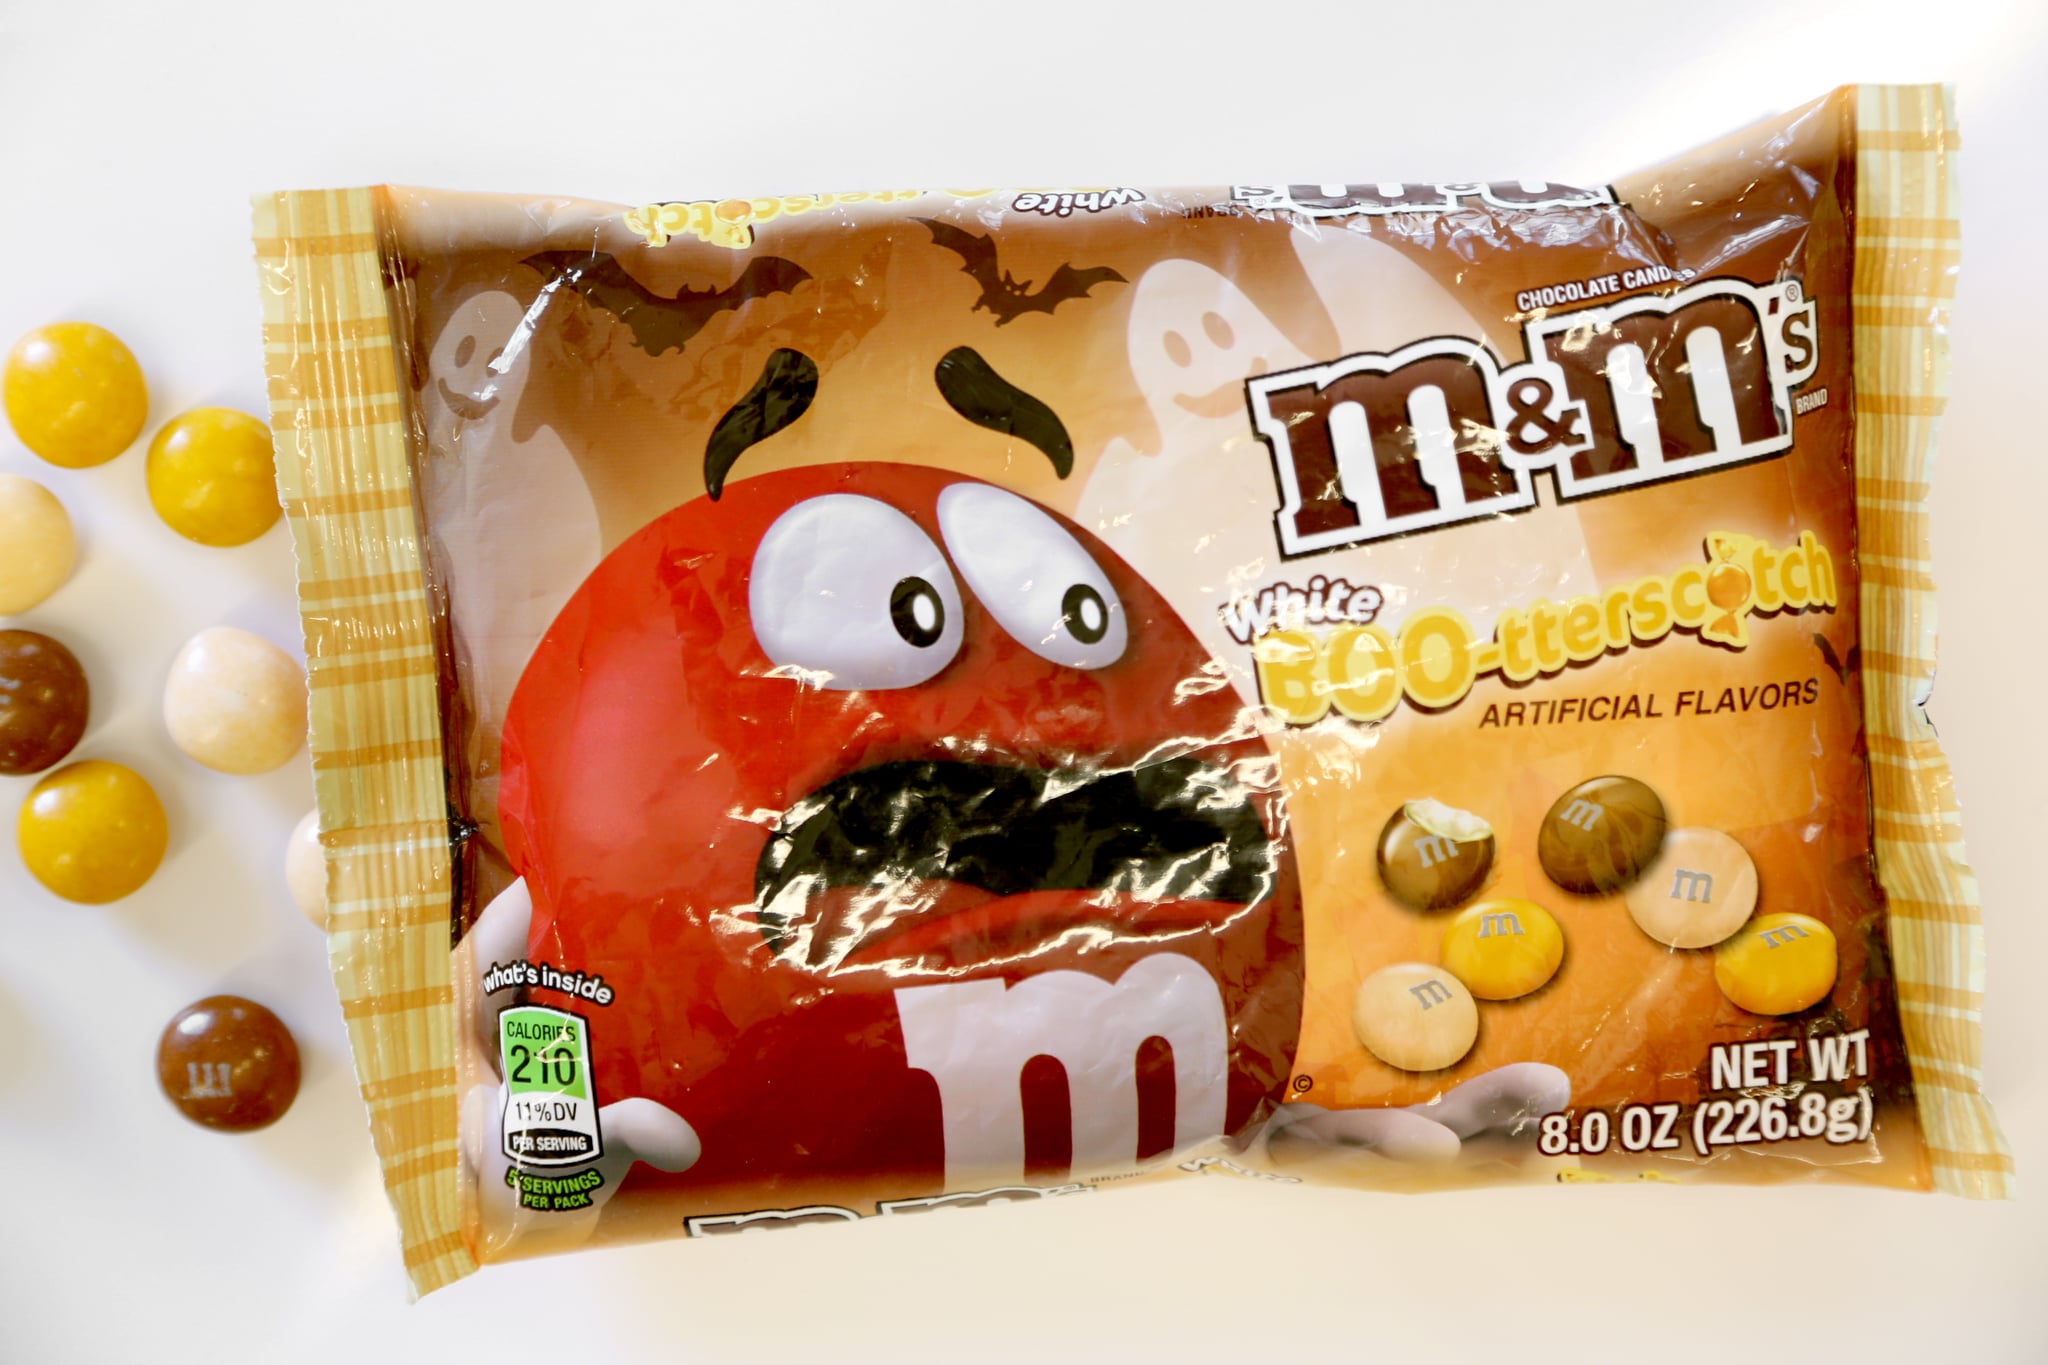 M&M's Booterscotch Flavor For Halloween 2016